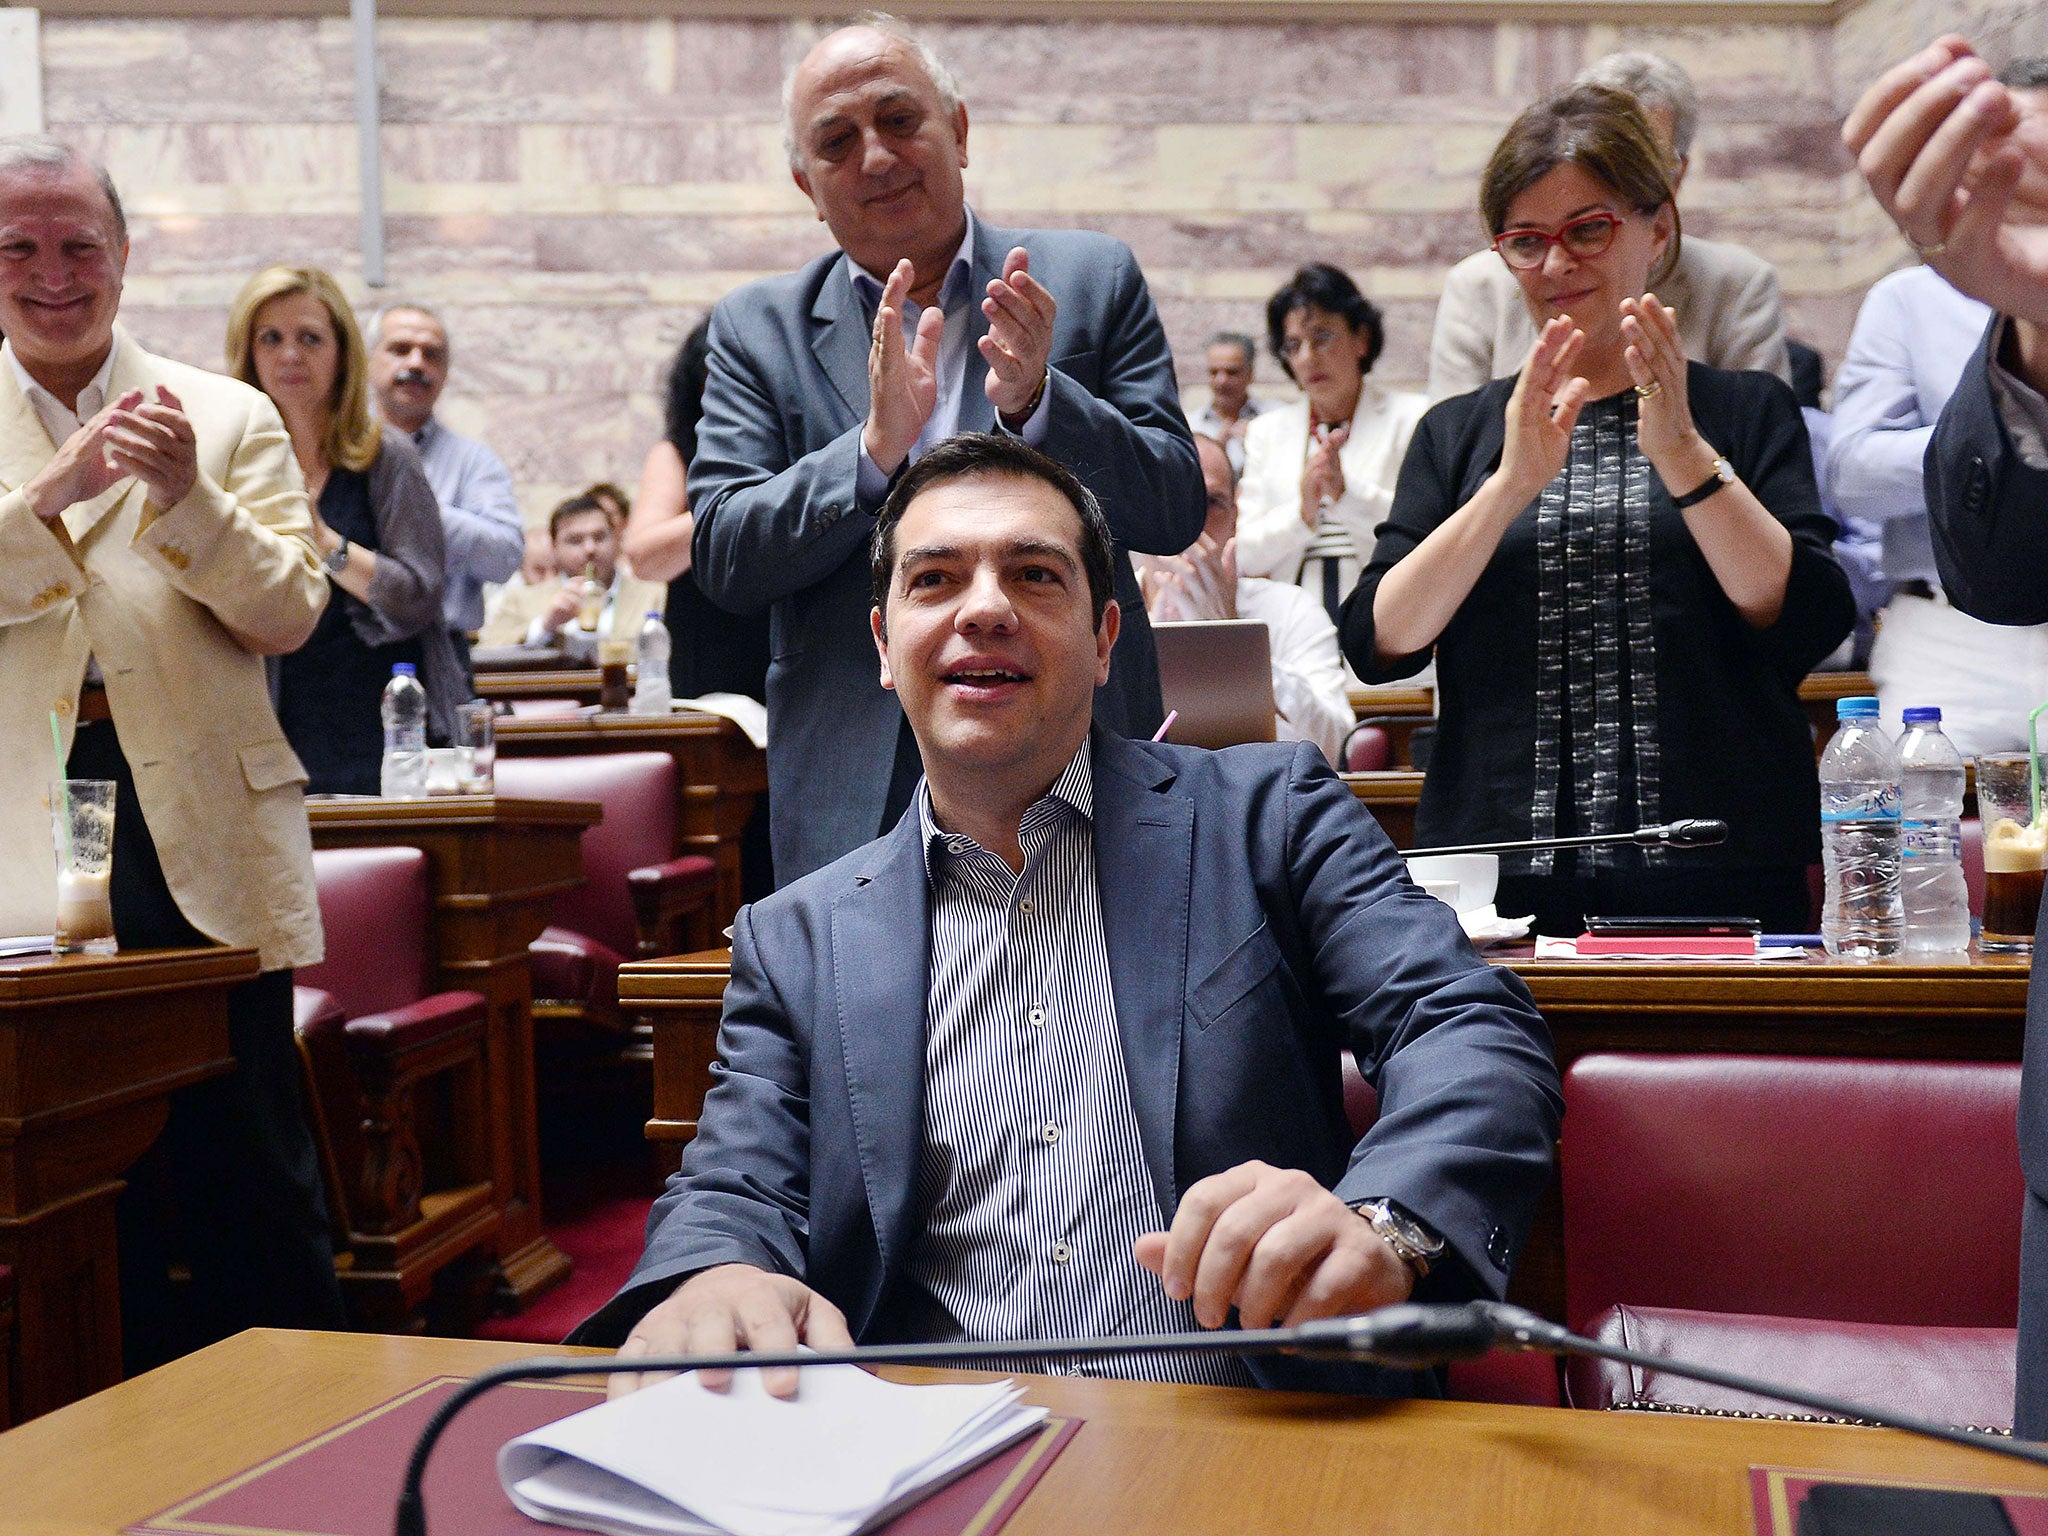 Greek prime minister Alexis Tsipras is applauded by lawmakers before addressing his parliamentary group meeting at the Greek Parliament in Athens